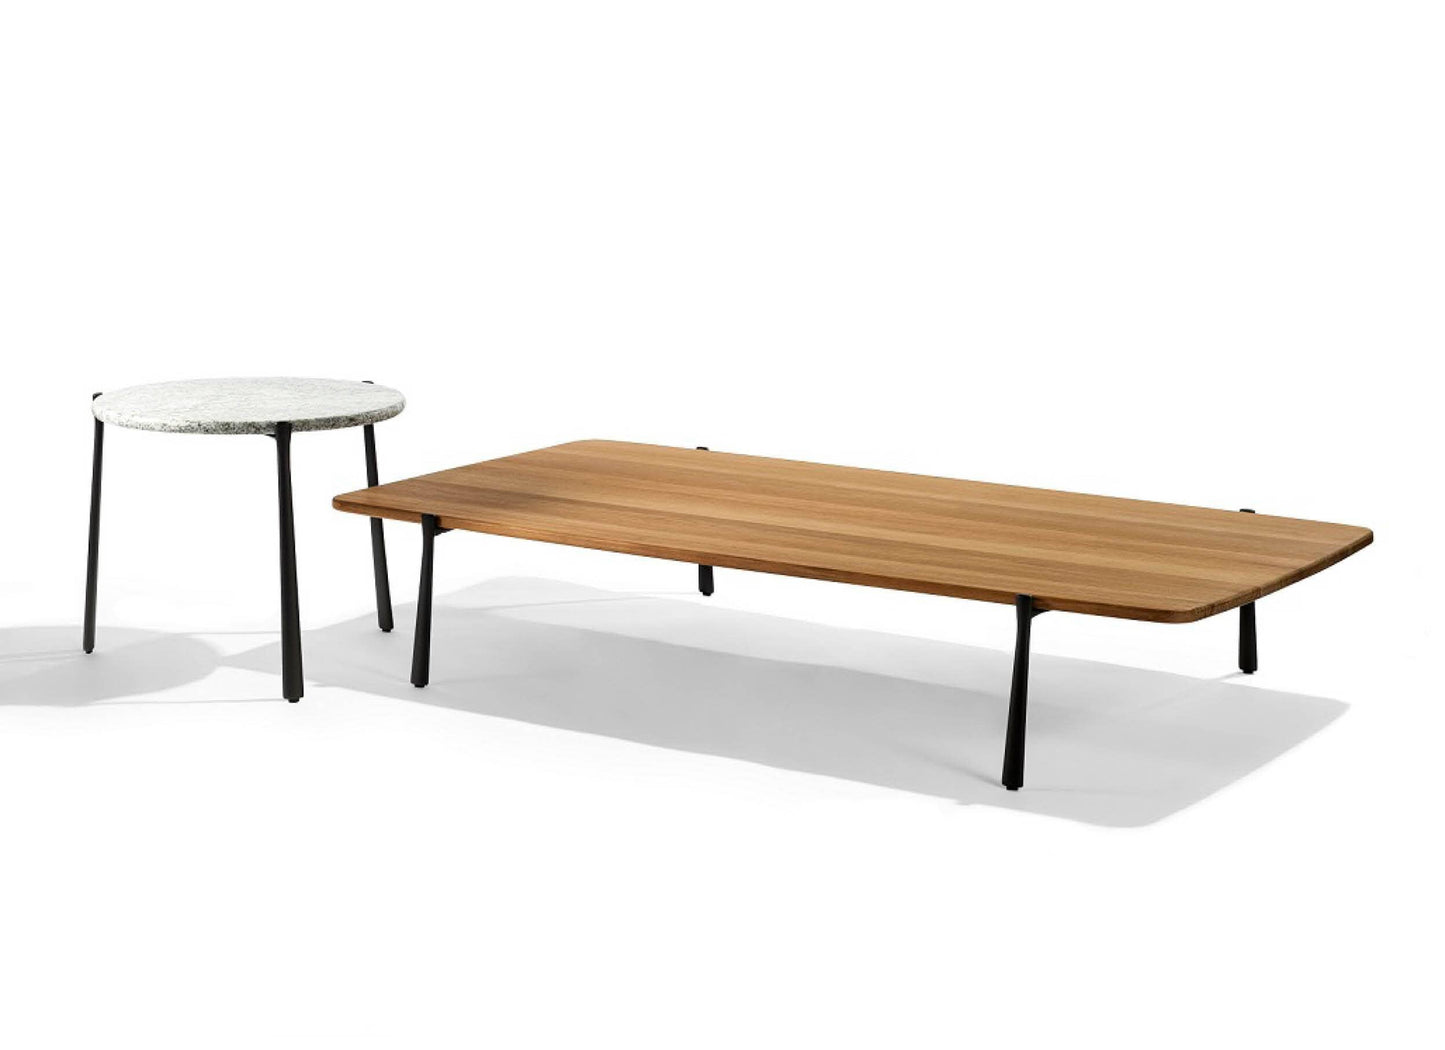 Branch Coffee Tables Round 20% Off Outdoor Furniture Tribu 